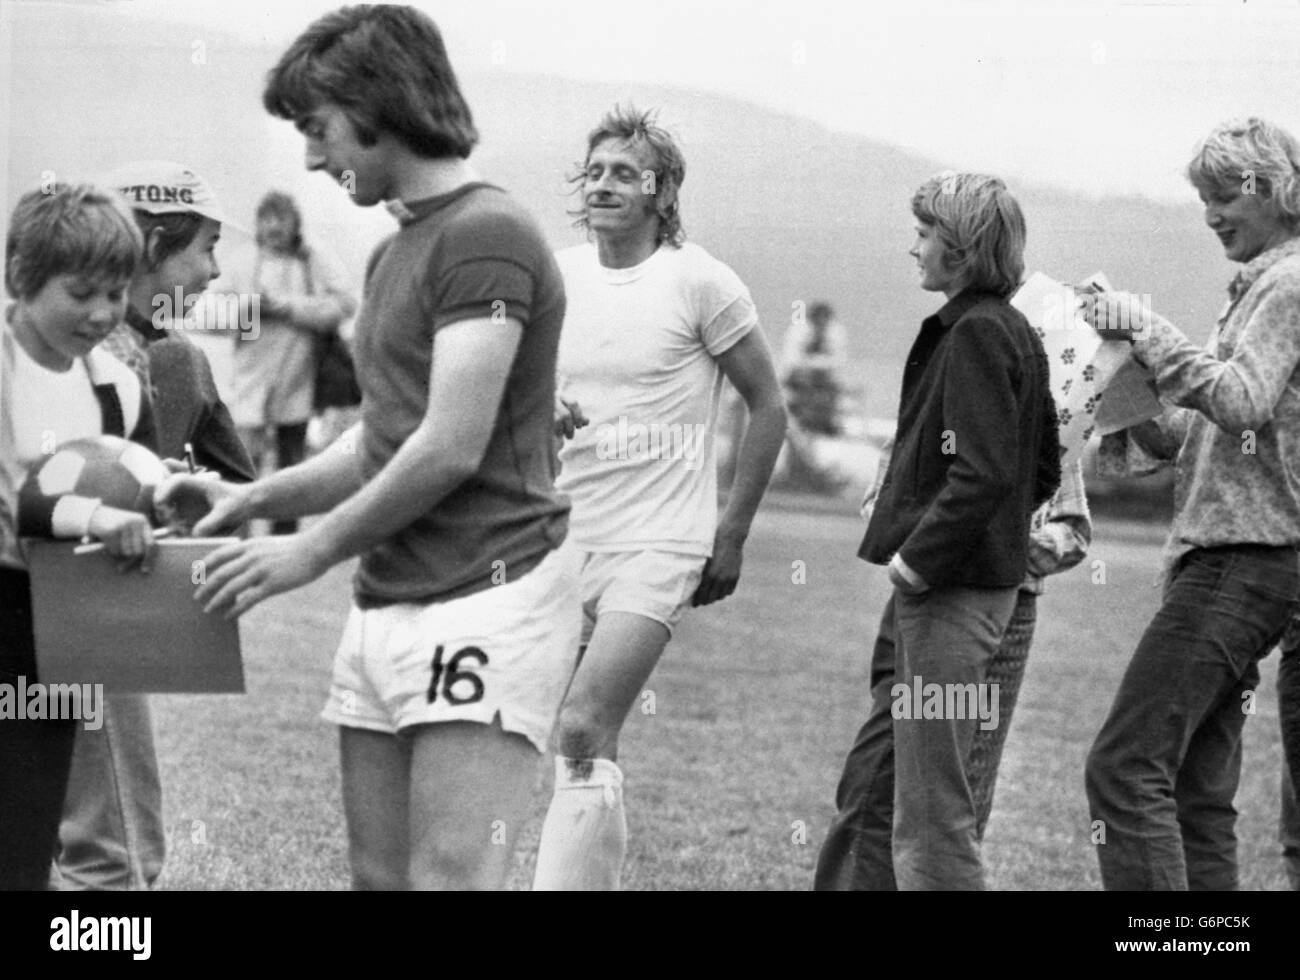 Young autograph hunters close in on members of Scotland's World Cup squad - Denis Law is in white - during the team's training session at their headquarters at Neuweilnau, near Frankfurt in West Germany. Scotland are set to play Zaire in a Group Two World Cup match at the Westfalenstadion in Dortmund. Stock Photo